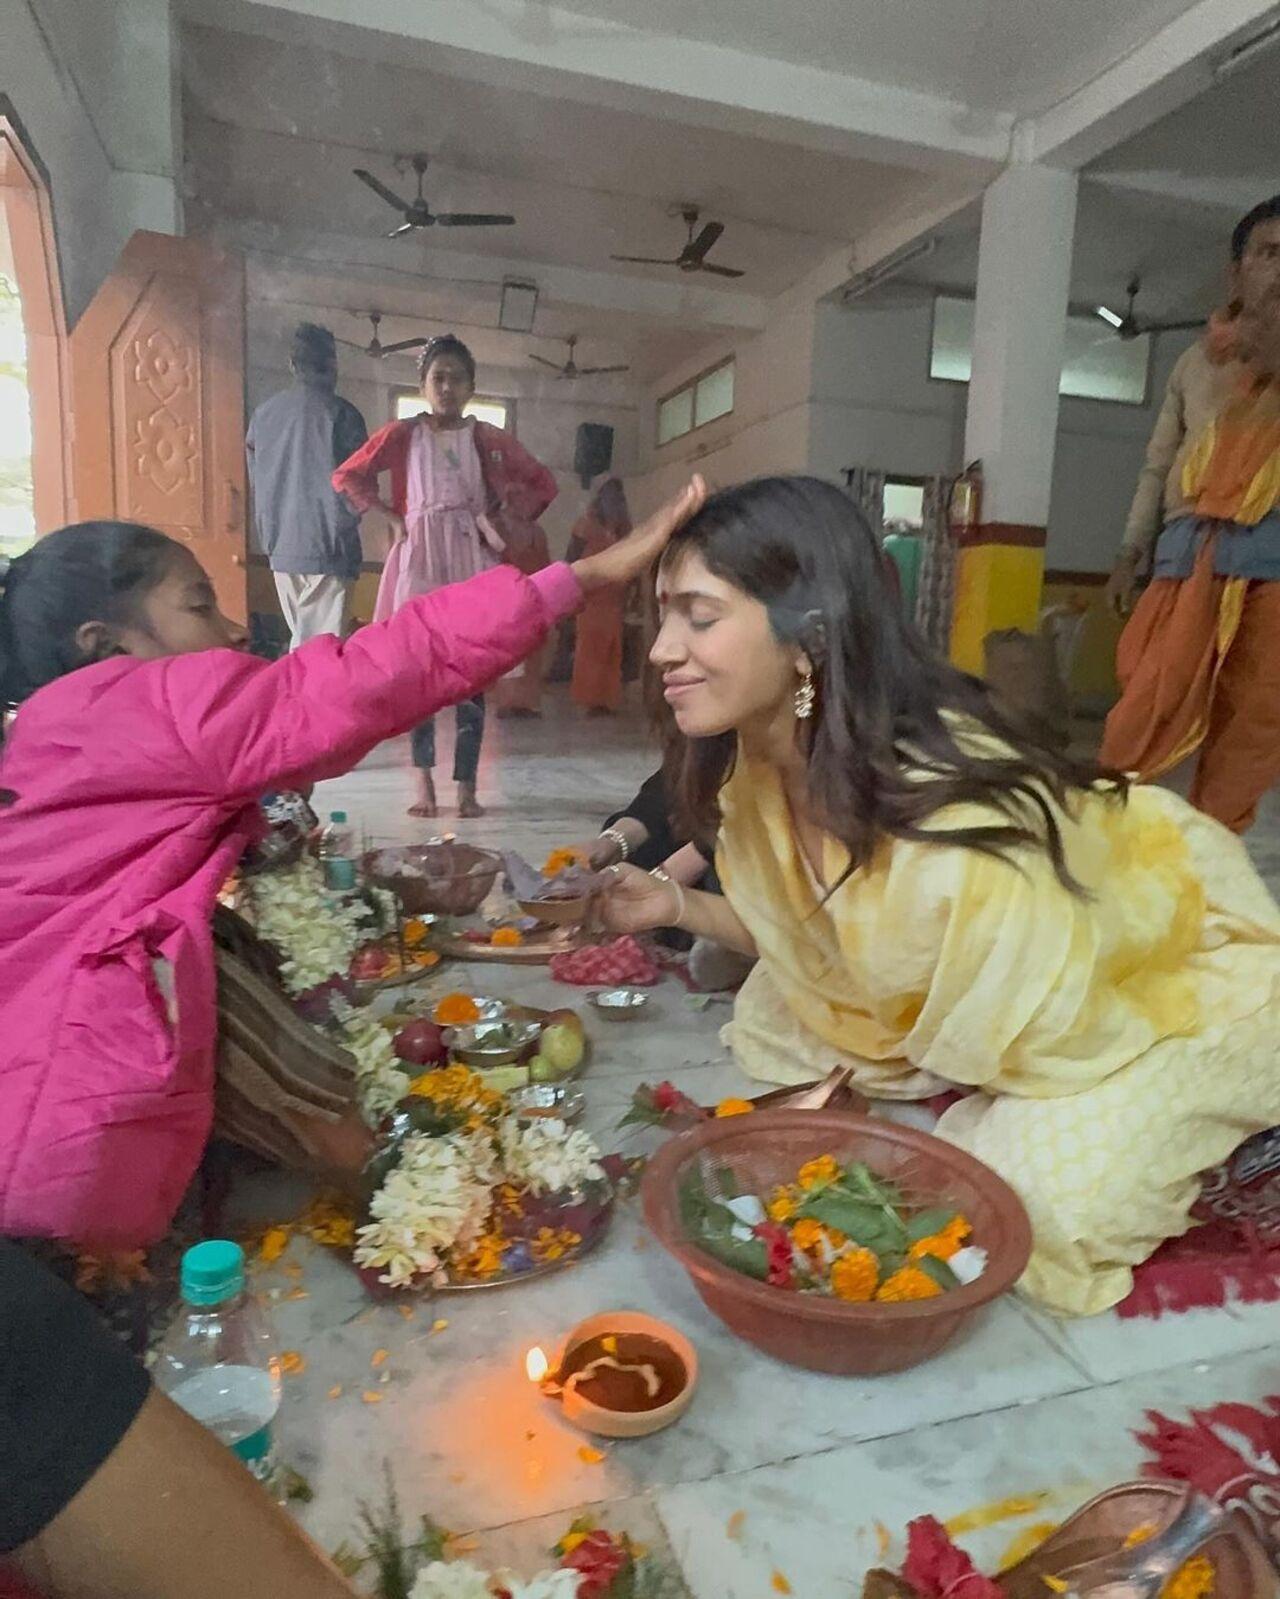 Bhumi Pednekar shared a bunch of pictures from her visit to the Kamakhya Temple in Guwahati, Assam. She is seen getting the red tilak on her forehead by a young girl at the temple